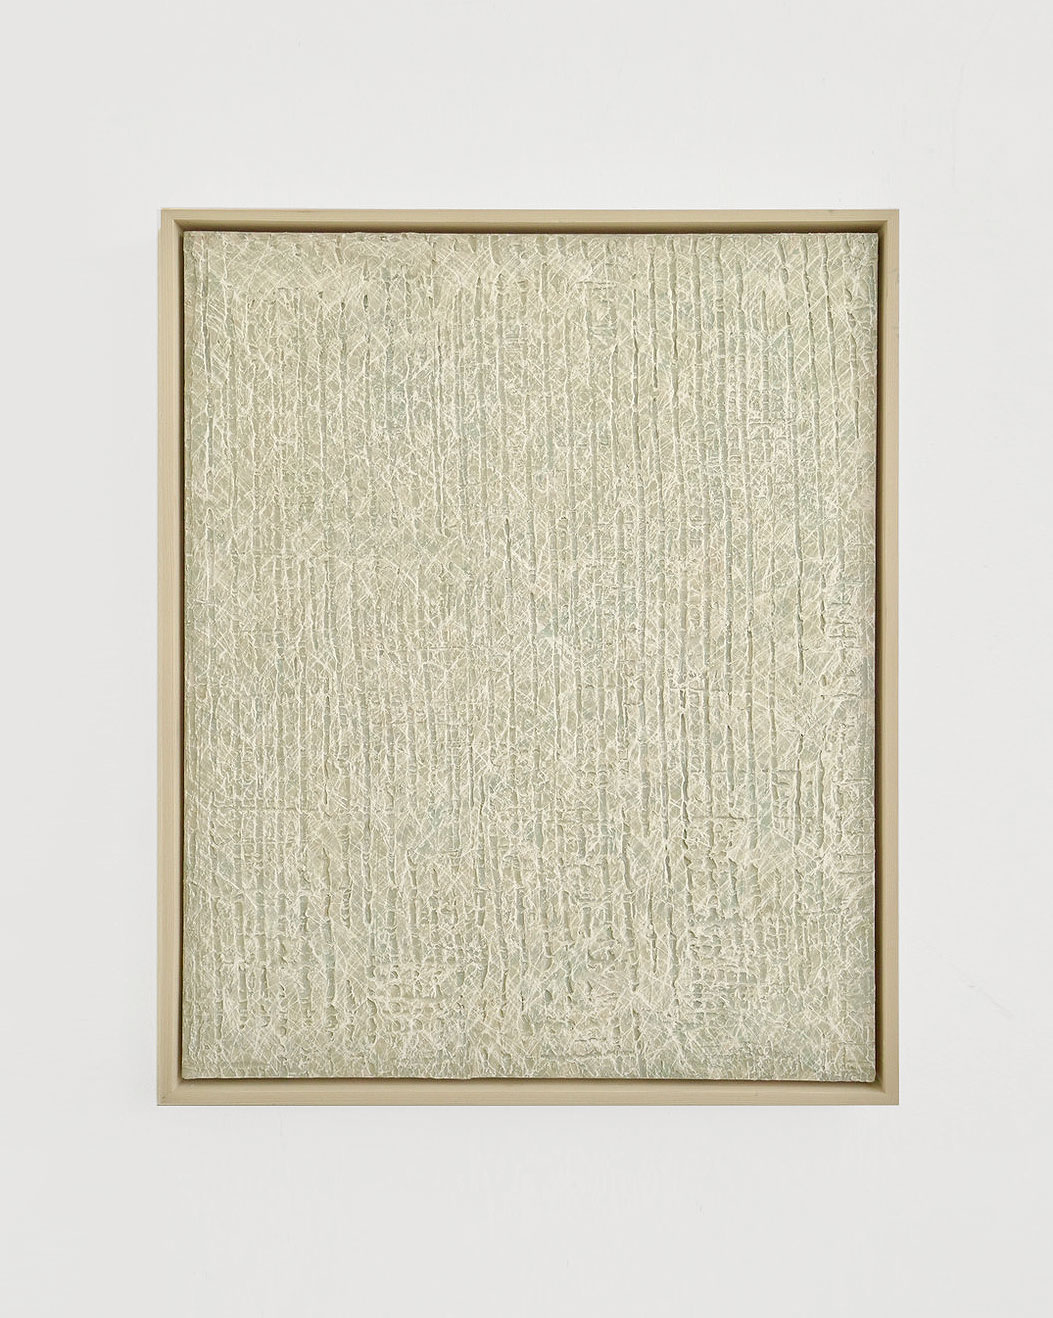 Woo Byoung Yun, Superposition No.23-02-191, 2023, Plaster & gouache on wood panel 65.1 x 53.0 cm